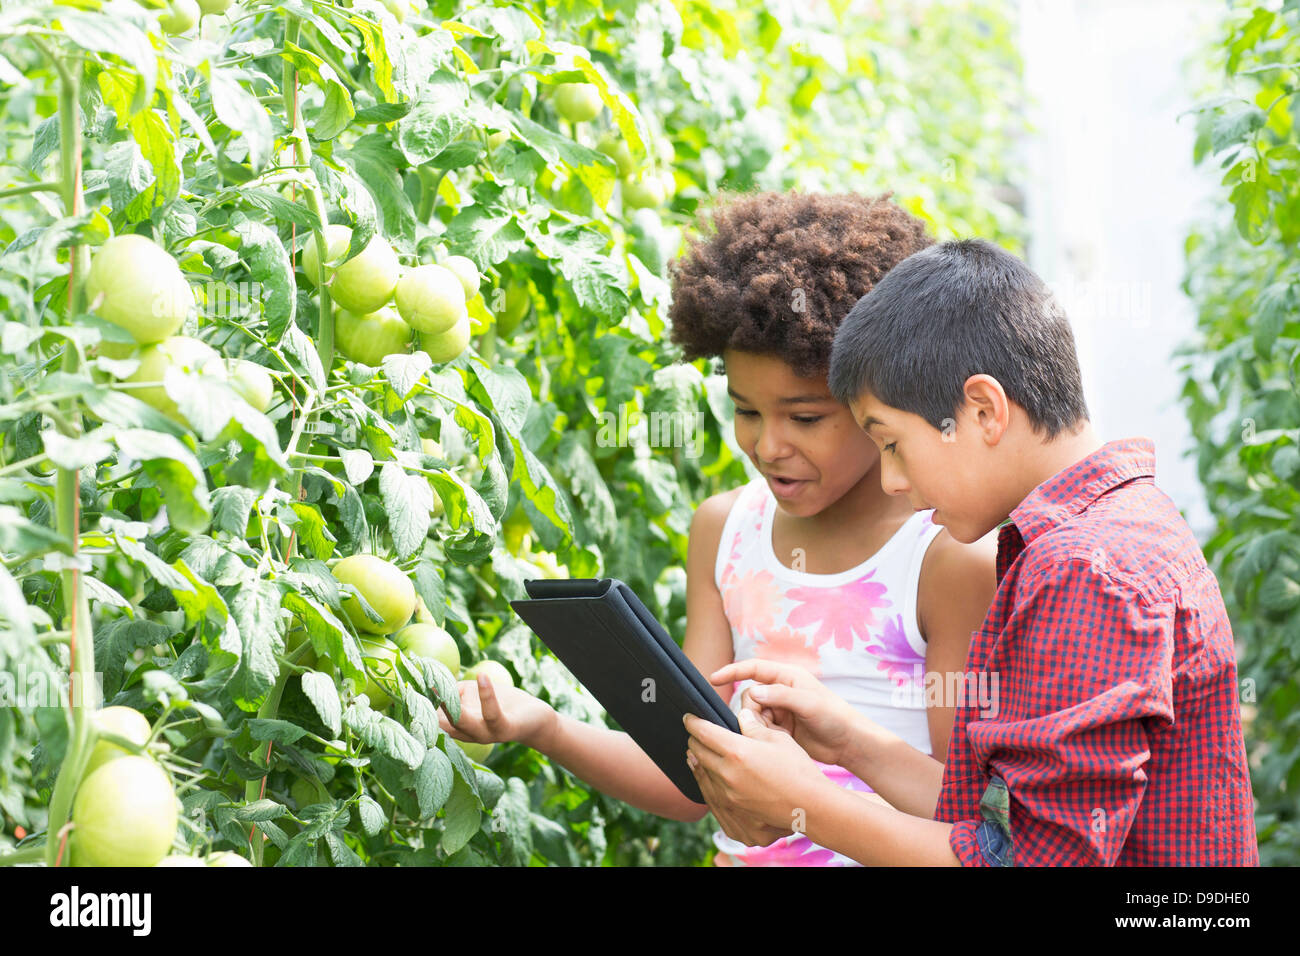 Boy and girl using digital tablet inspecting tomato plants Stock Photo